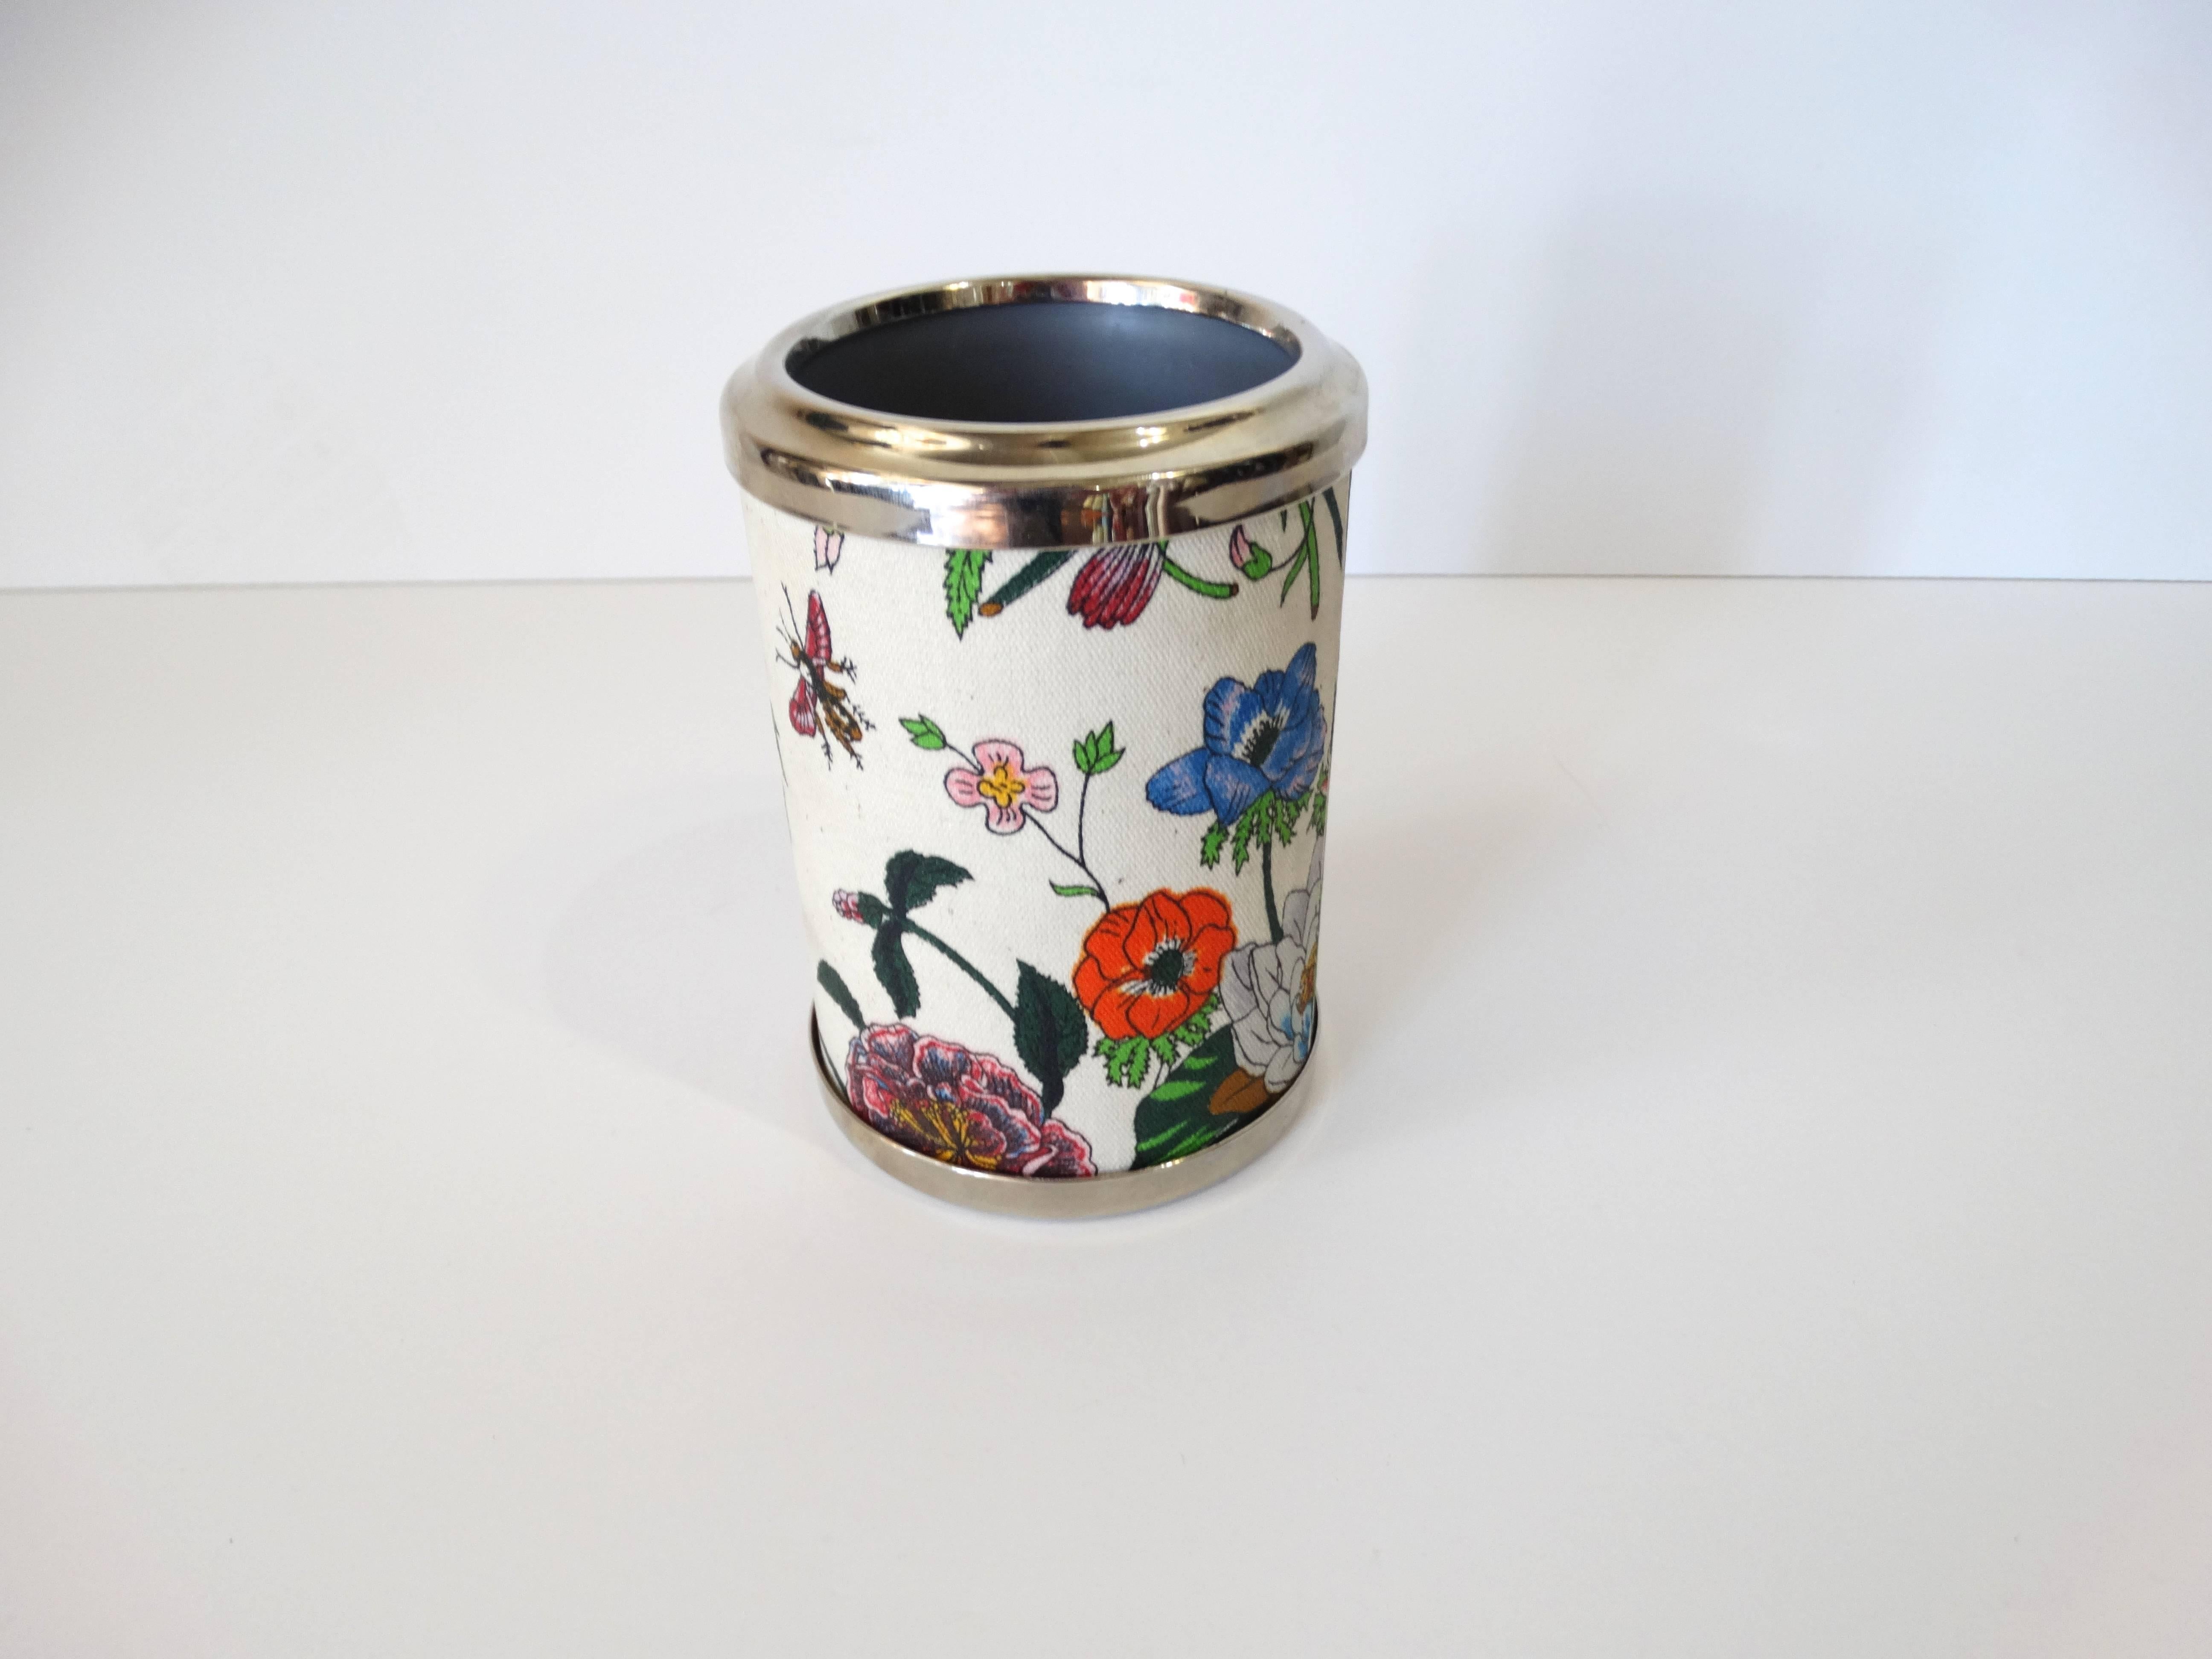 Gorgeous 1980's Gucci Flora Vittorio Accornero pattern Container Cup. Great for a desk or vanity. Object is made of Flora fabric in cotton and Silver hardware. Signed Gucci made in Italy 

Measures 4